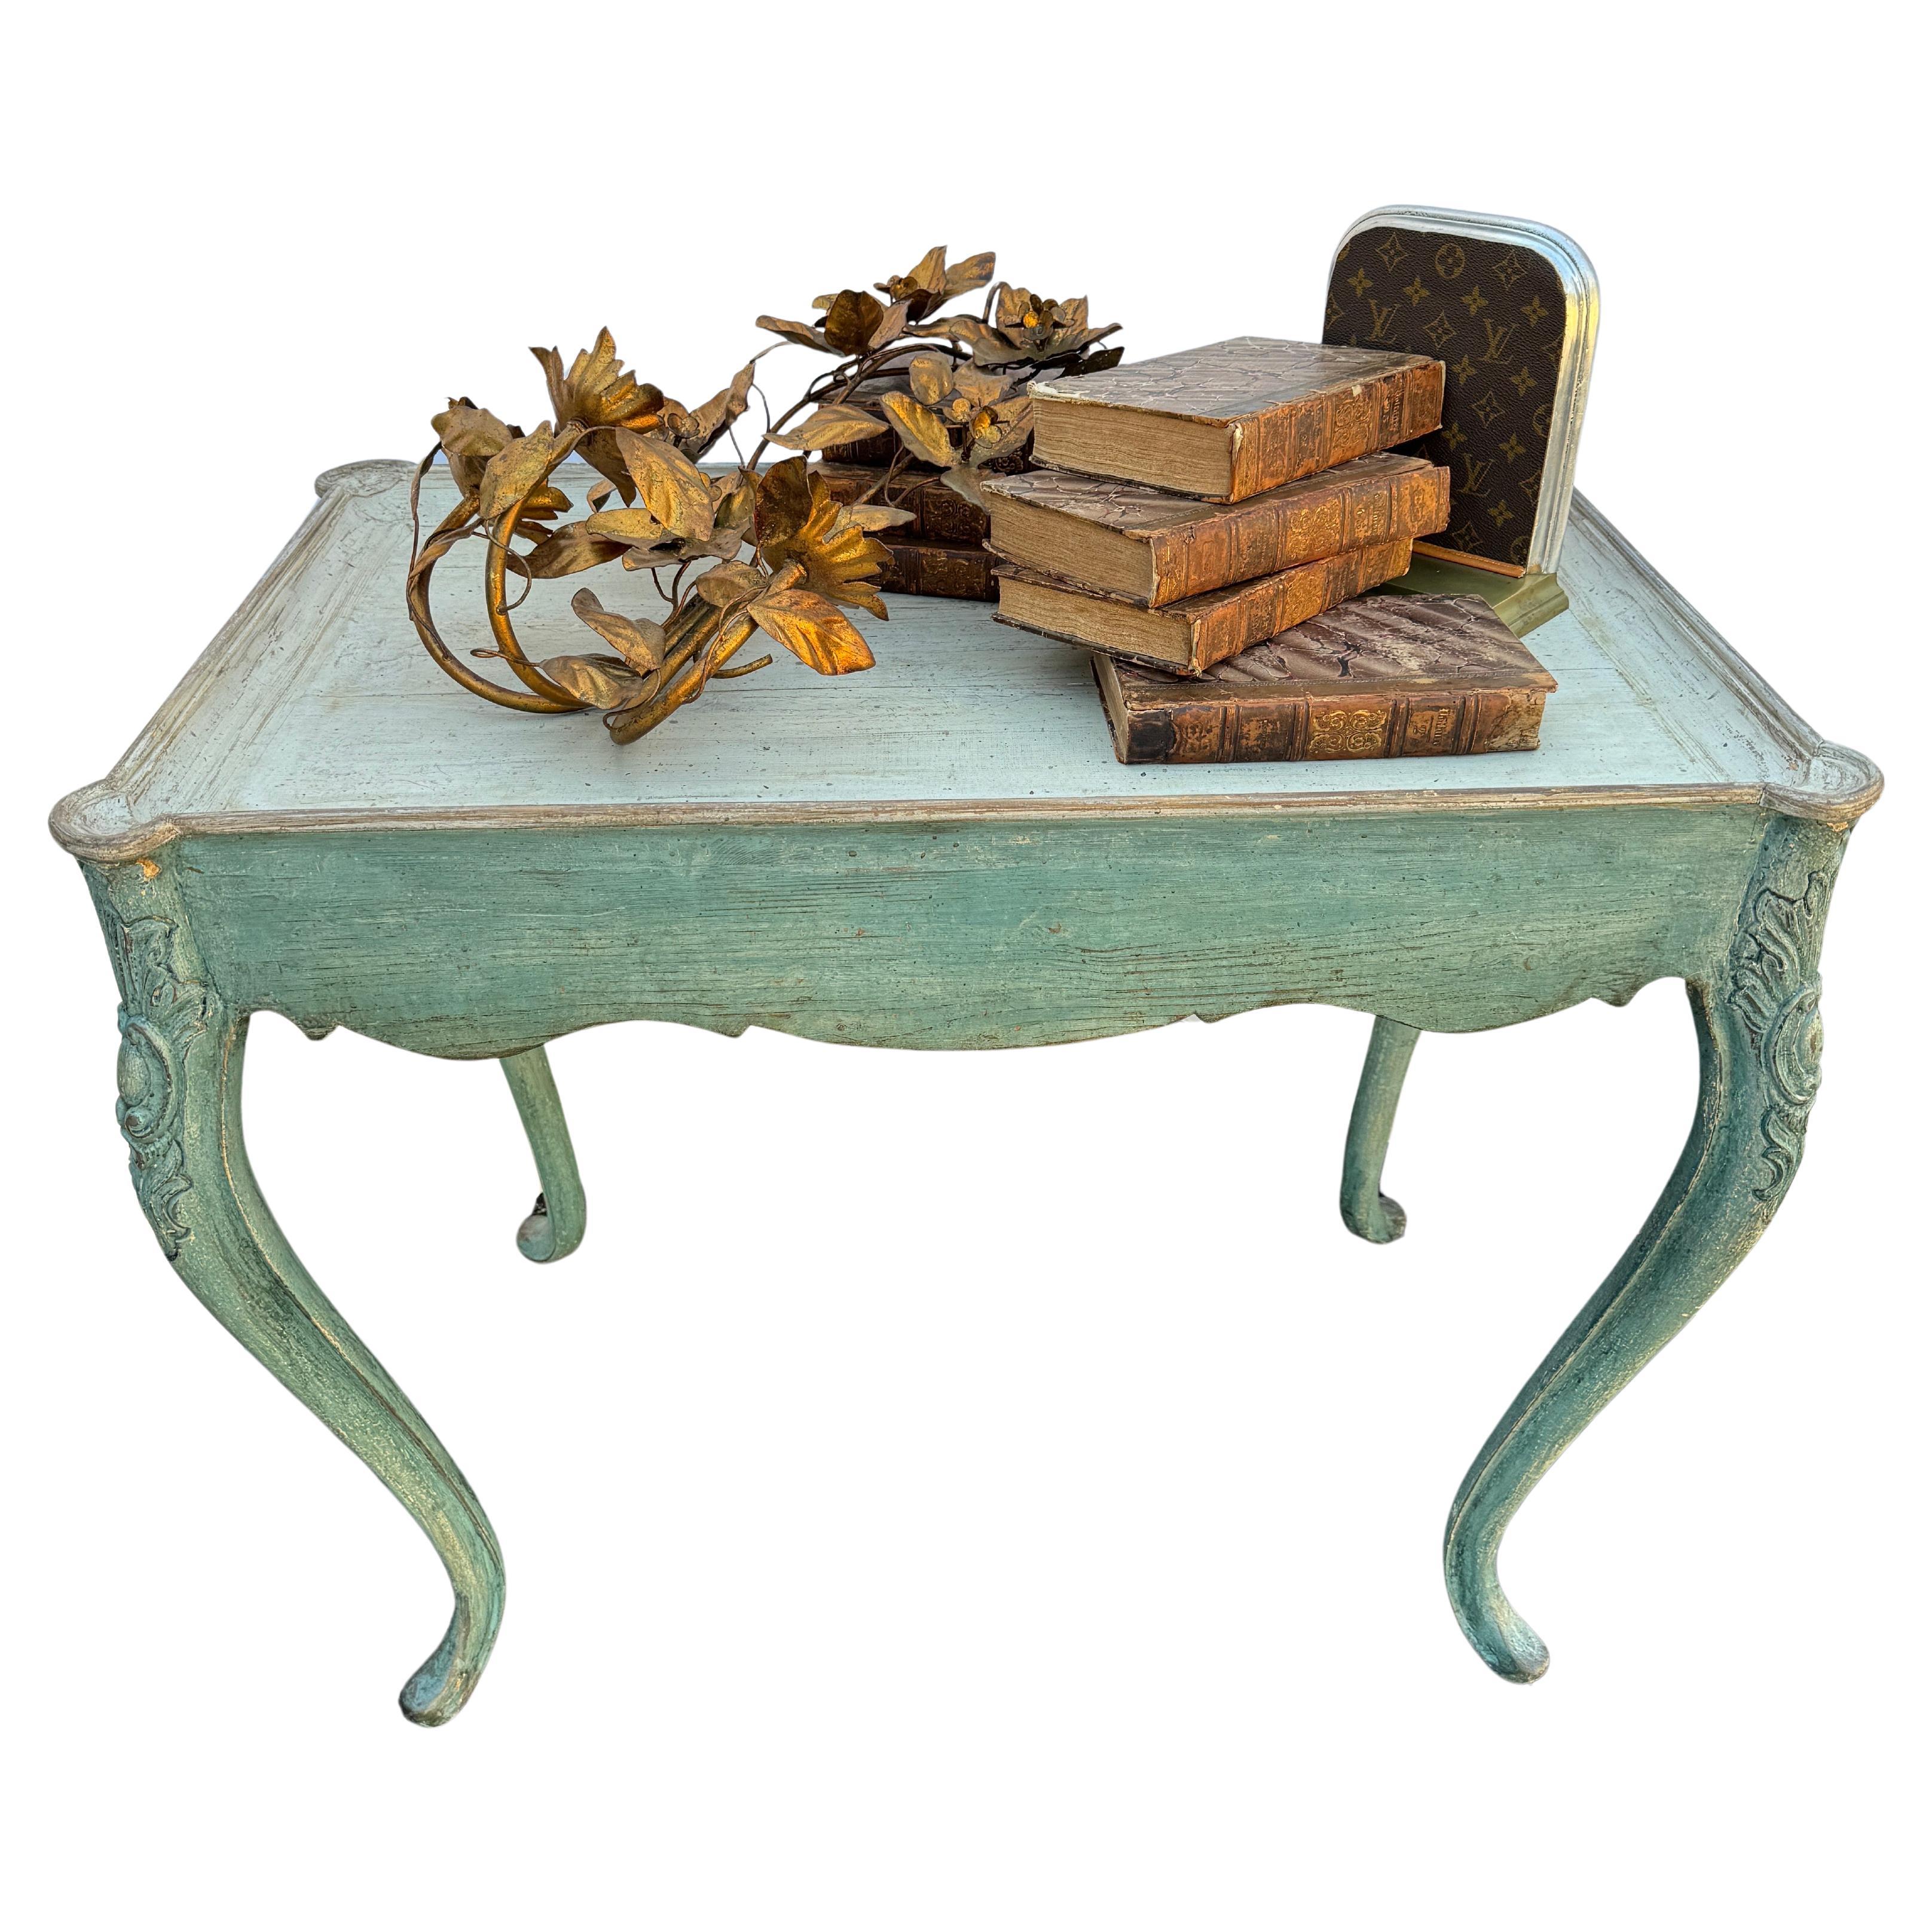 Hand painted and hand distressed wood side table with carved cabriole legs in a muted Scandinavian blue green color. The elegance and classic style of this piece with scalloped carved edges is equally at home in the country or traditional room and